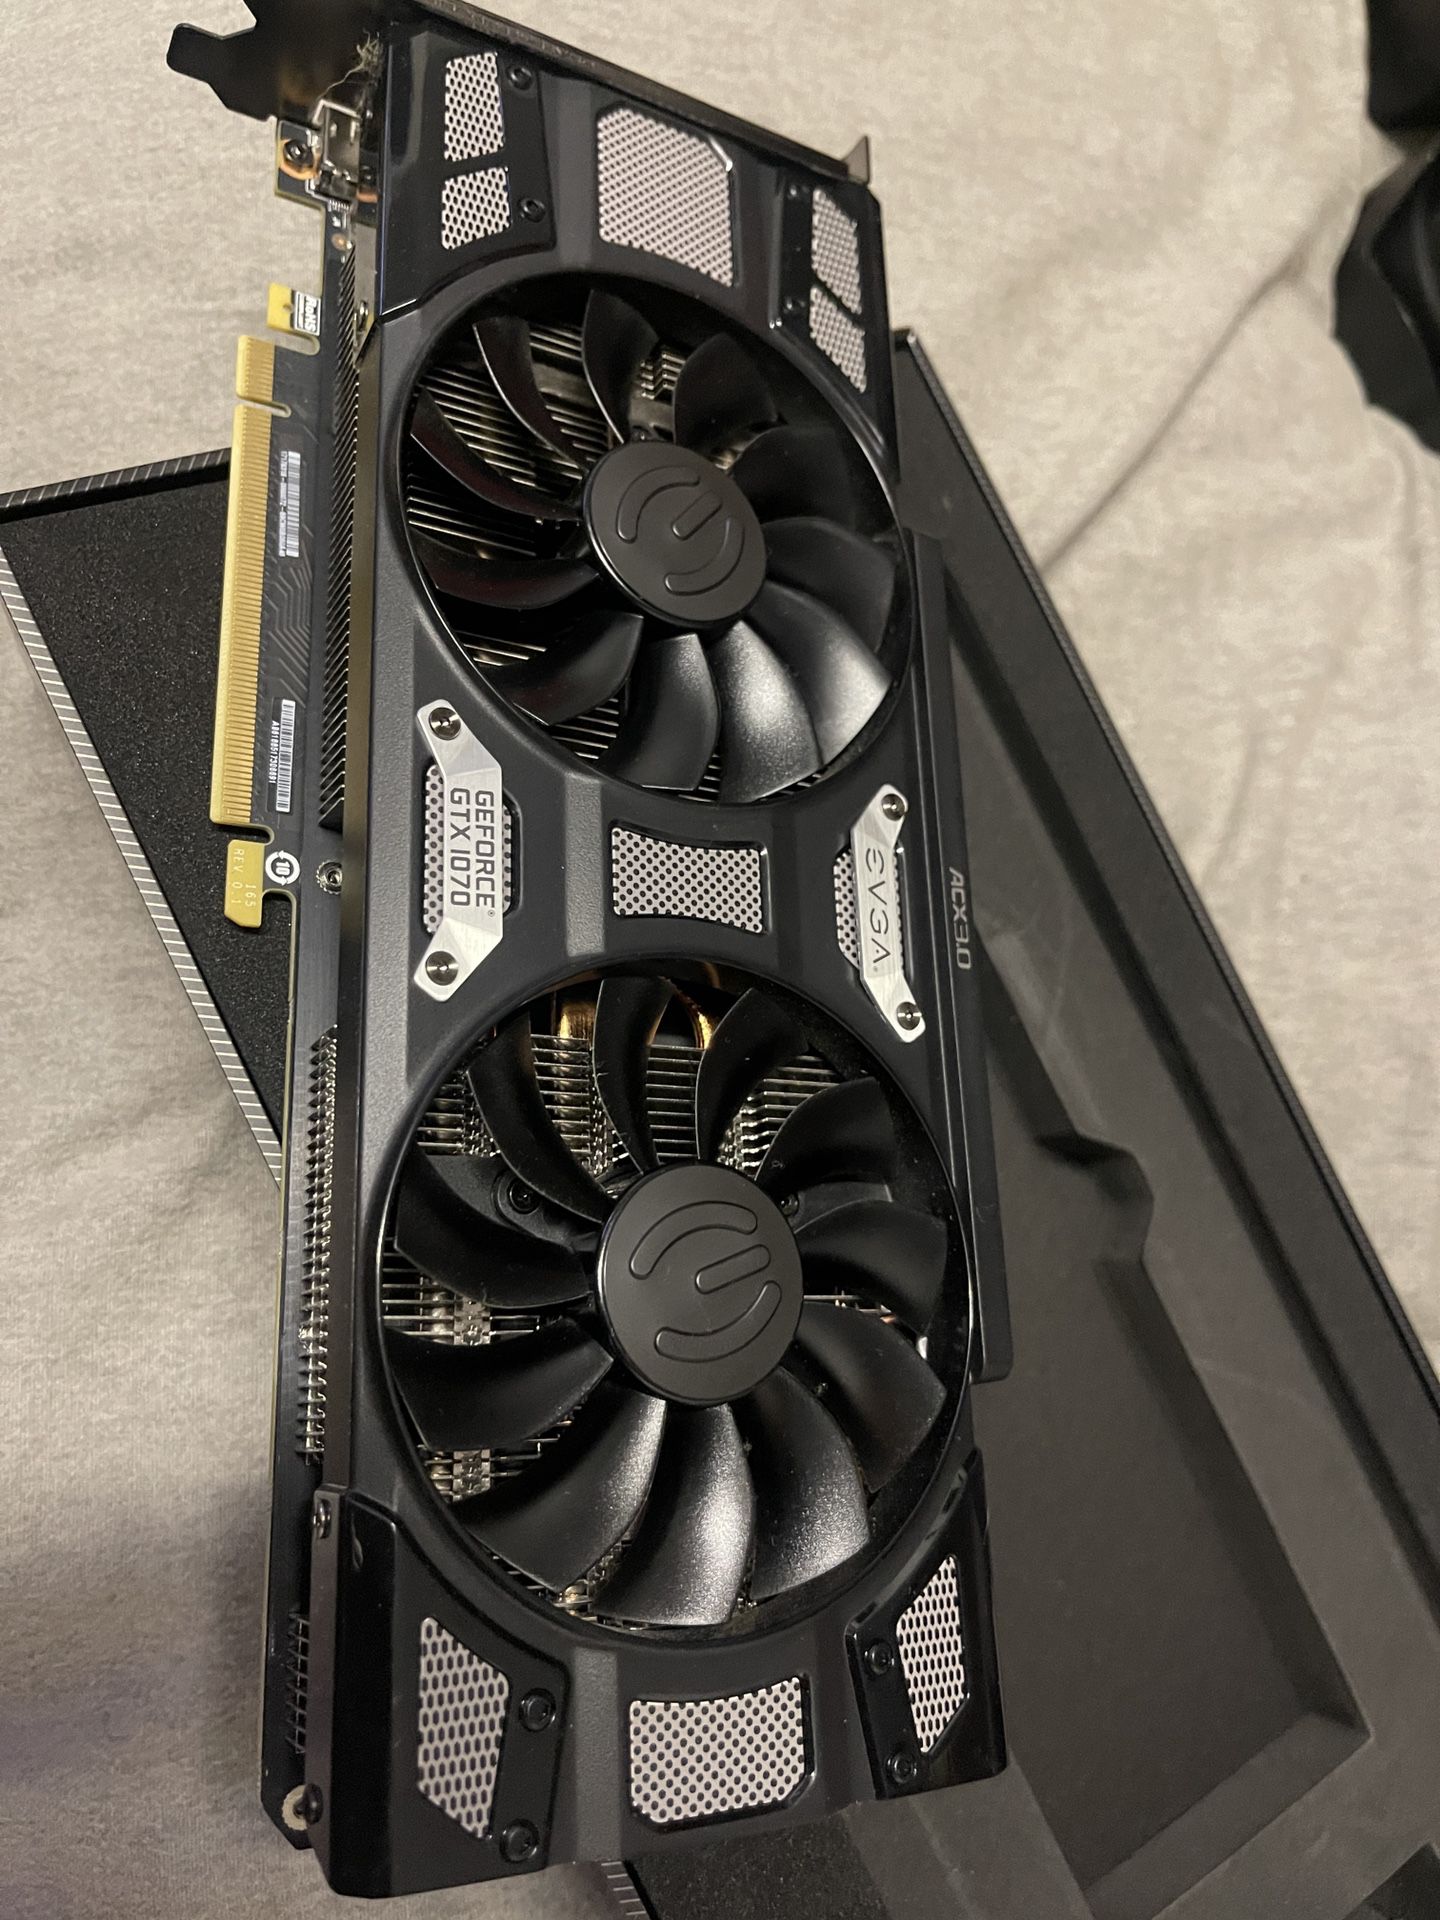 EVGA GTX1070 Graphics Card 8GB for Sale in Seattle, WA - OfferUp